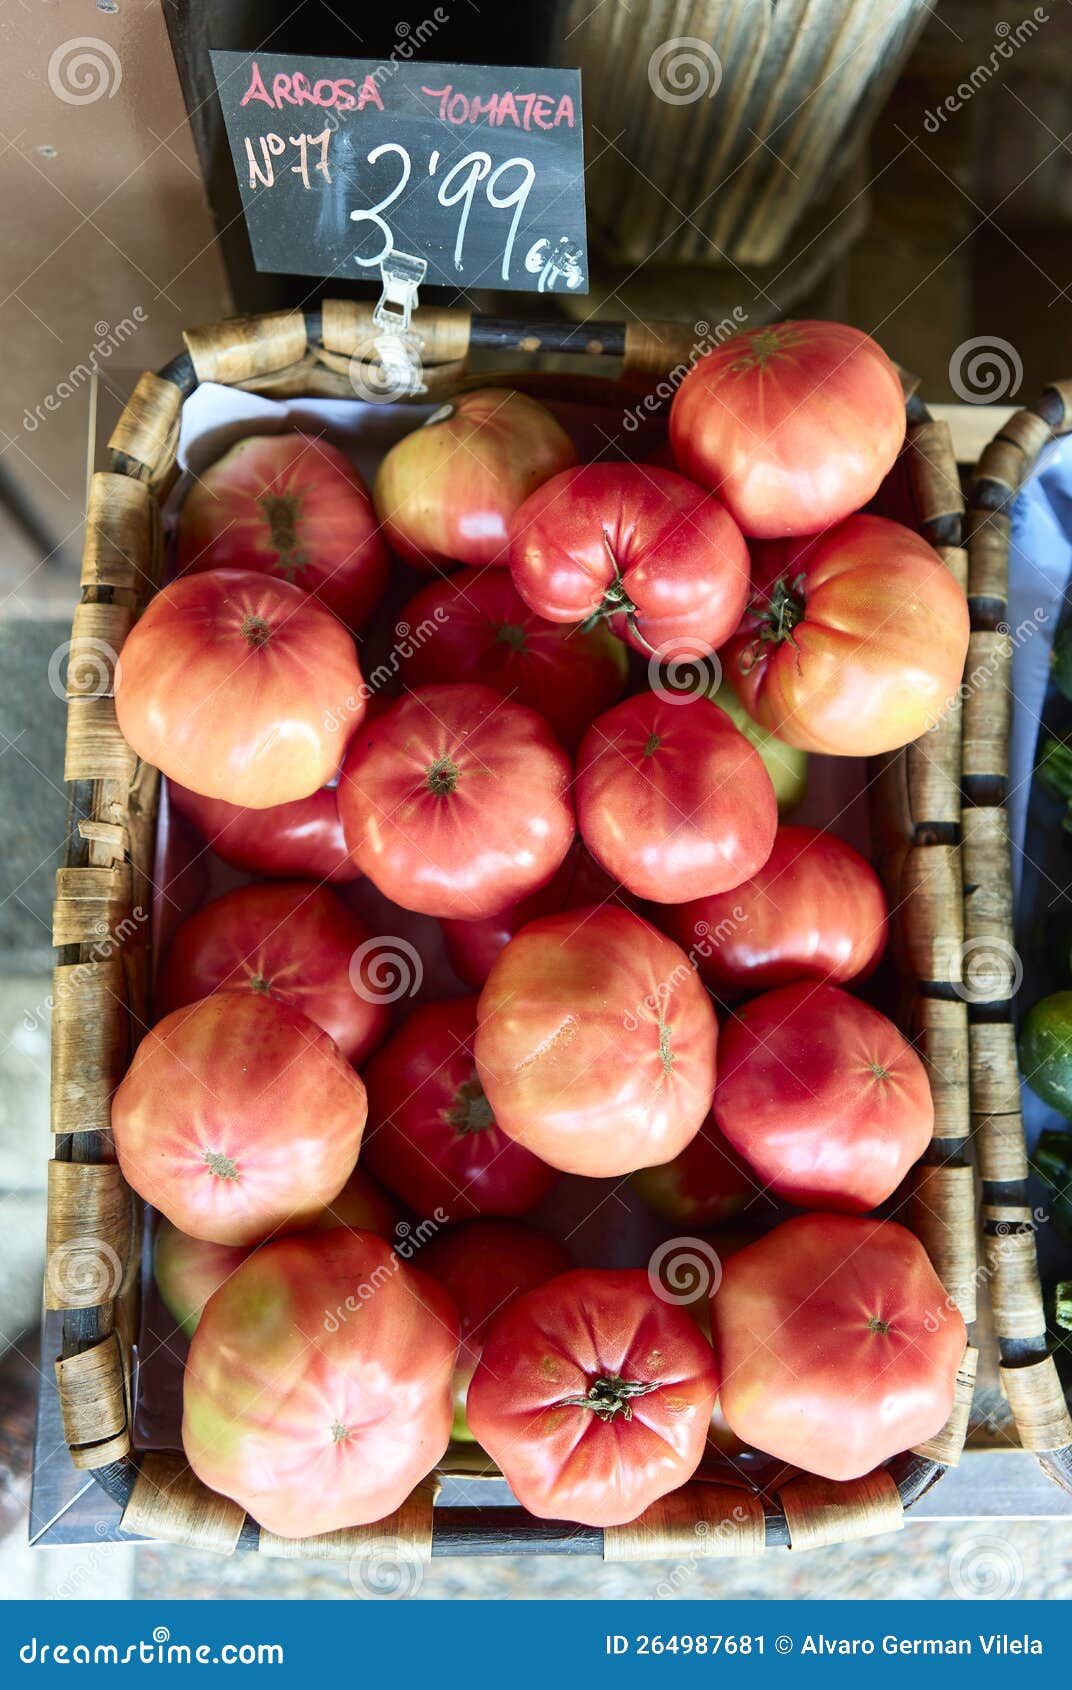 a basquet of pink tomatoes